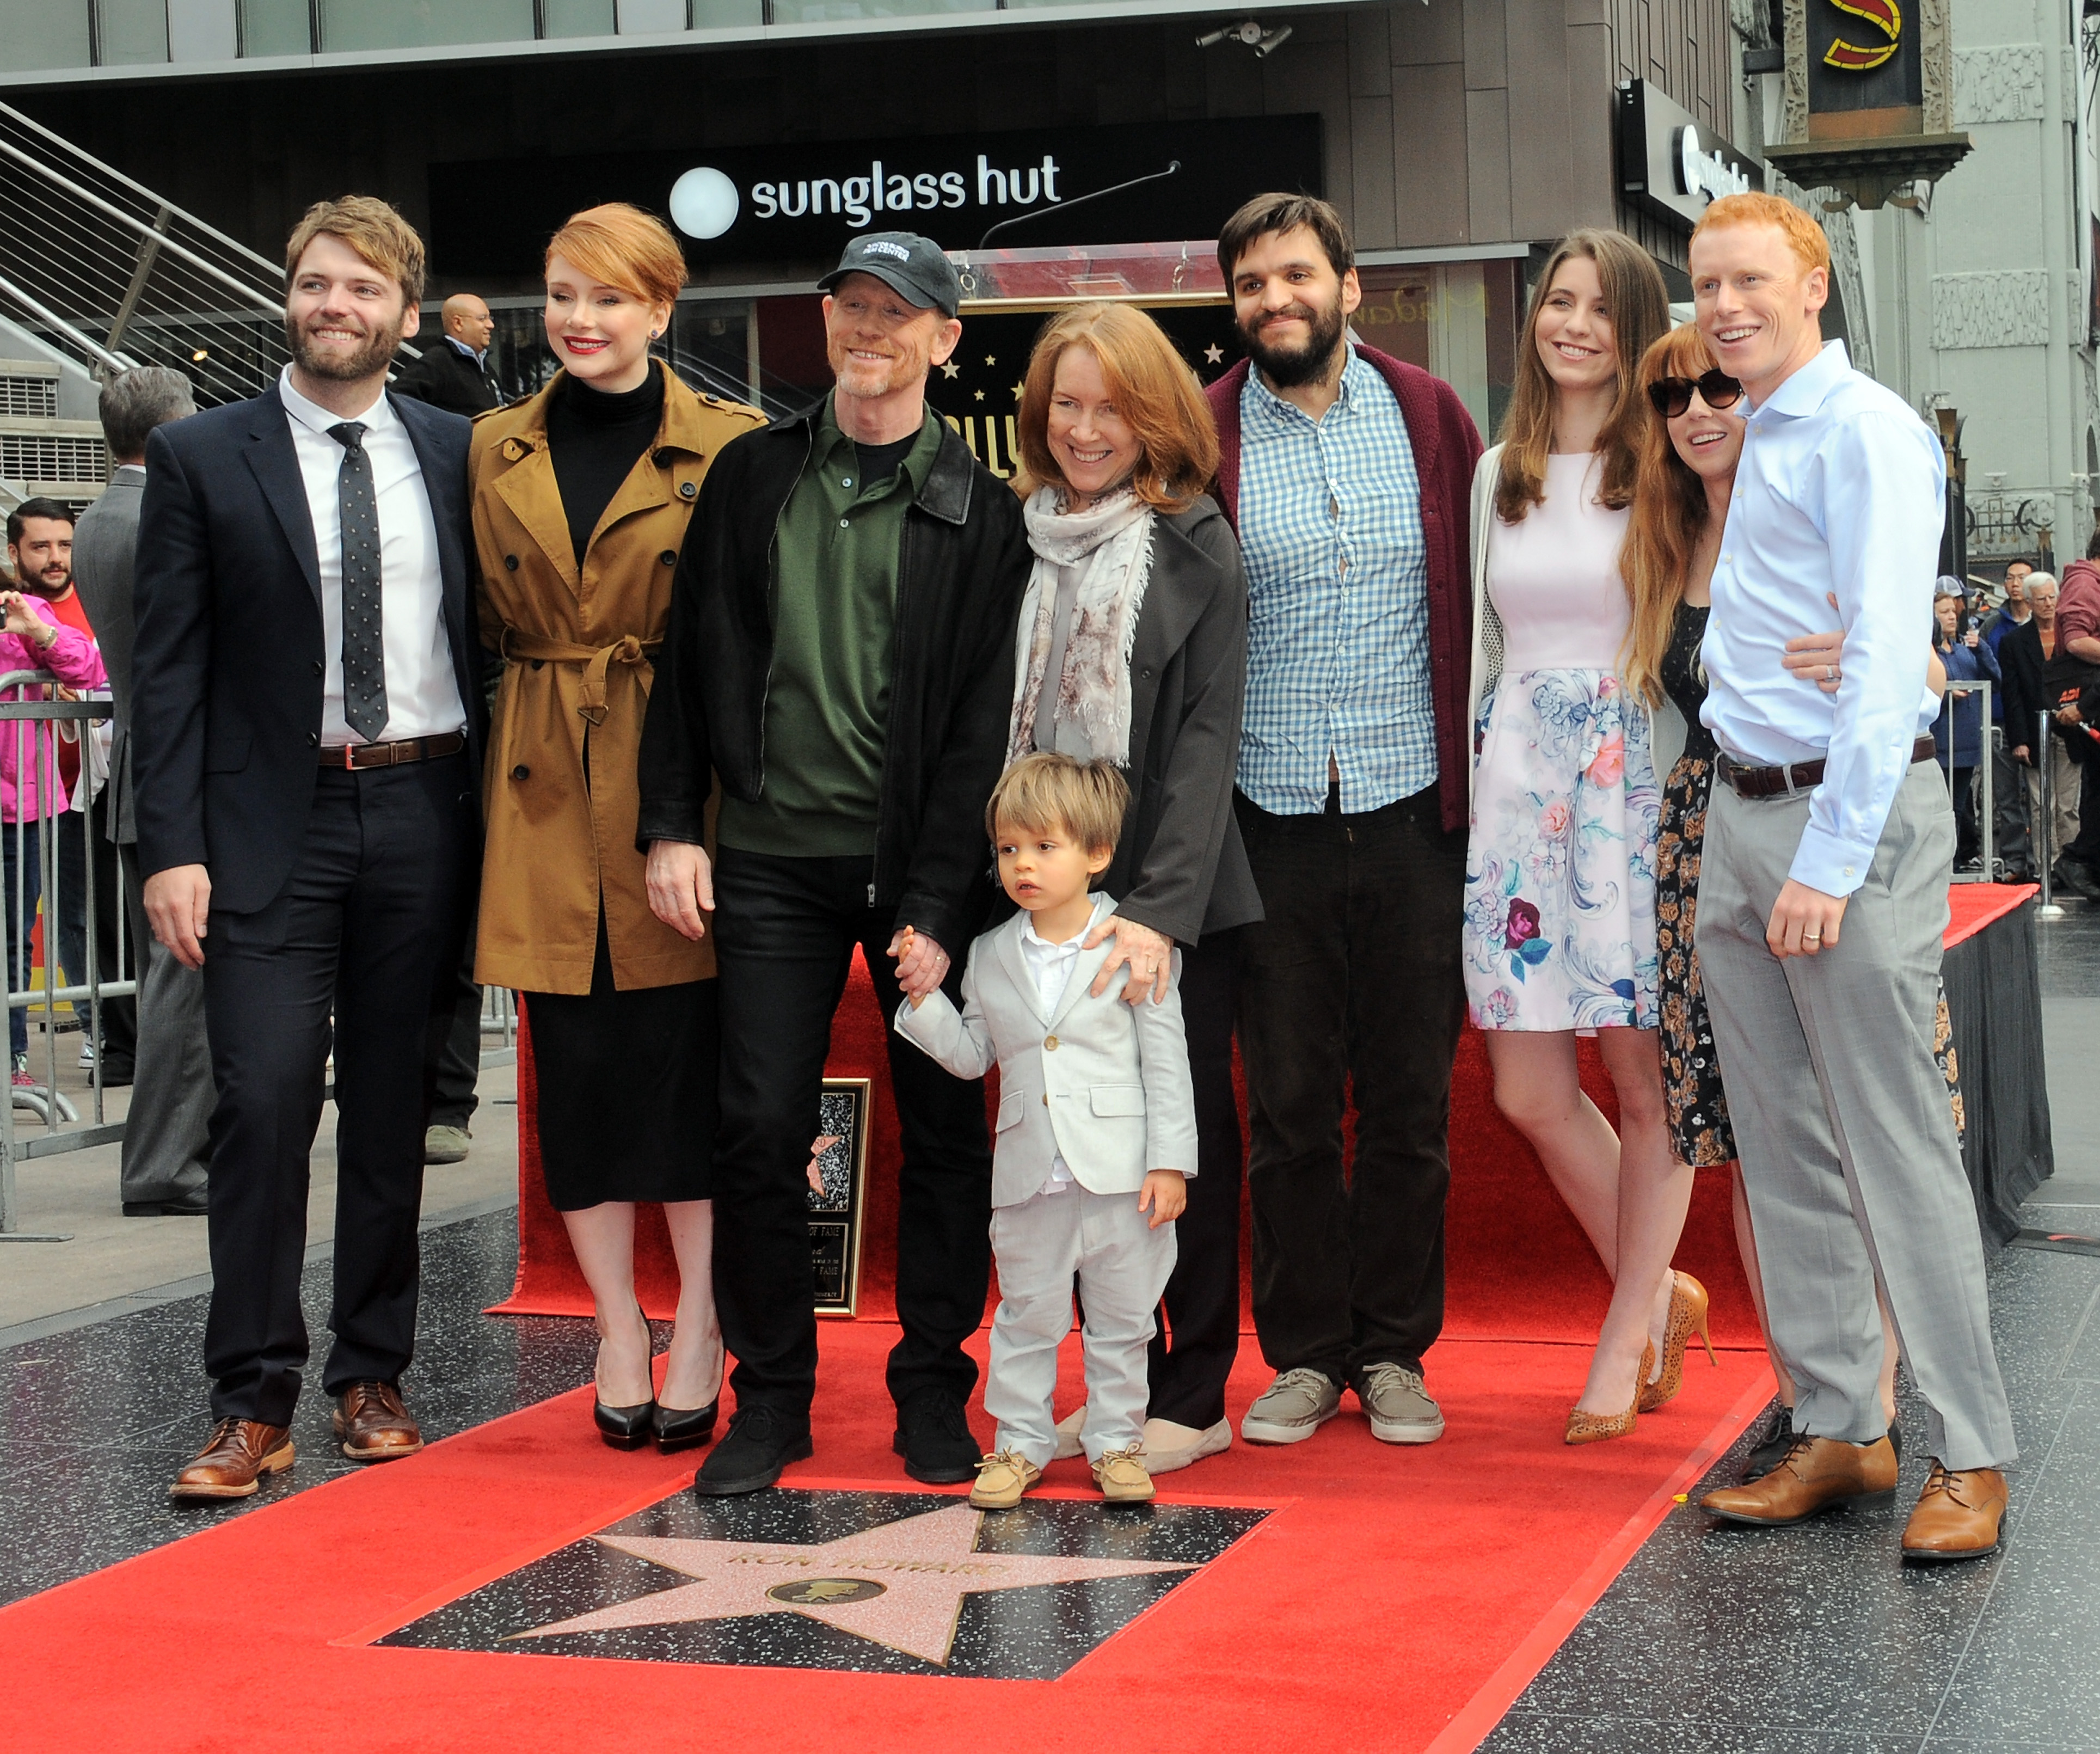 Seth Gabel, actress Bryce Dallas Howard, director/father Ron Howard and mother Cheryl Howard at the Ron Howard Star ceremony on The Hollywood Walk Of Fame held on December 10, 2015 in Hollywood, California | Source: Getty Images